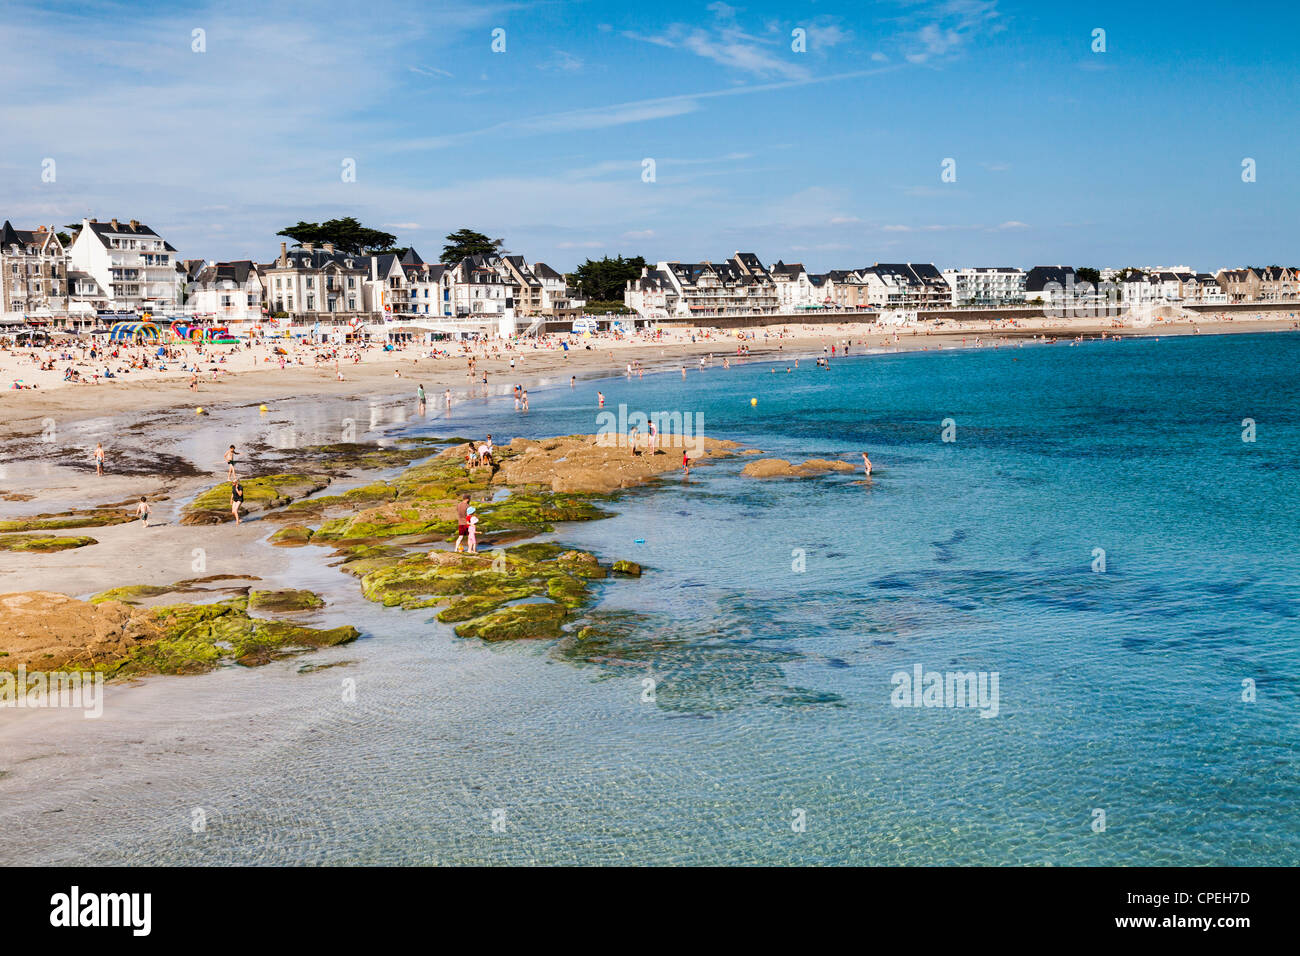 The beach at Quiberon on the Cote Sauvage, Brittany, France Stock Photo